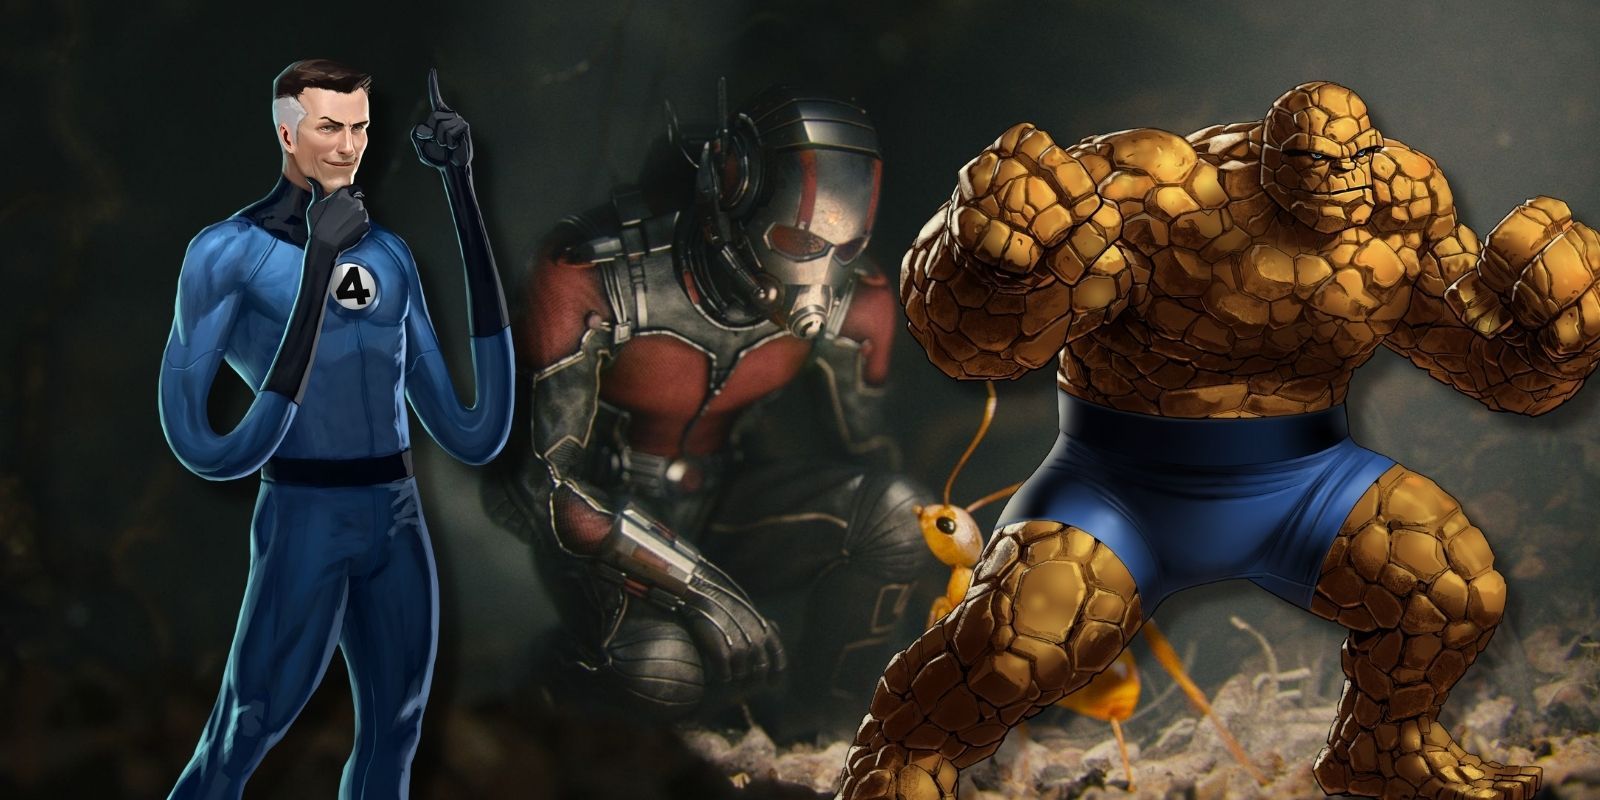 Mr Fantastic and The Thing standing alongside the MCU Ant-Man